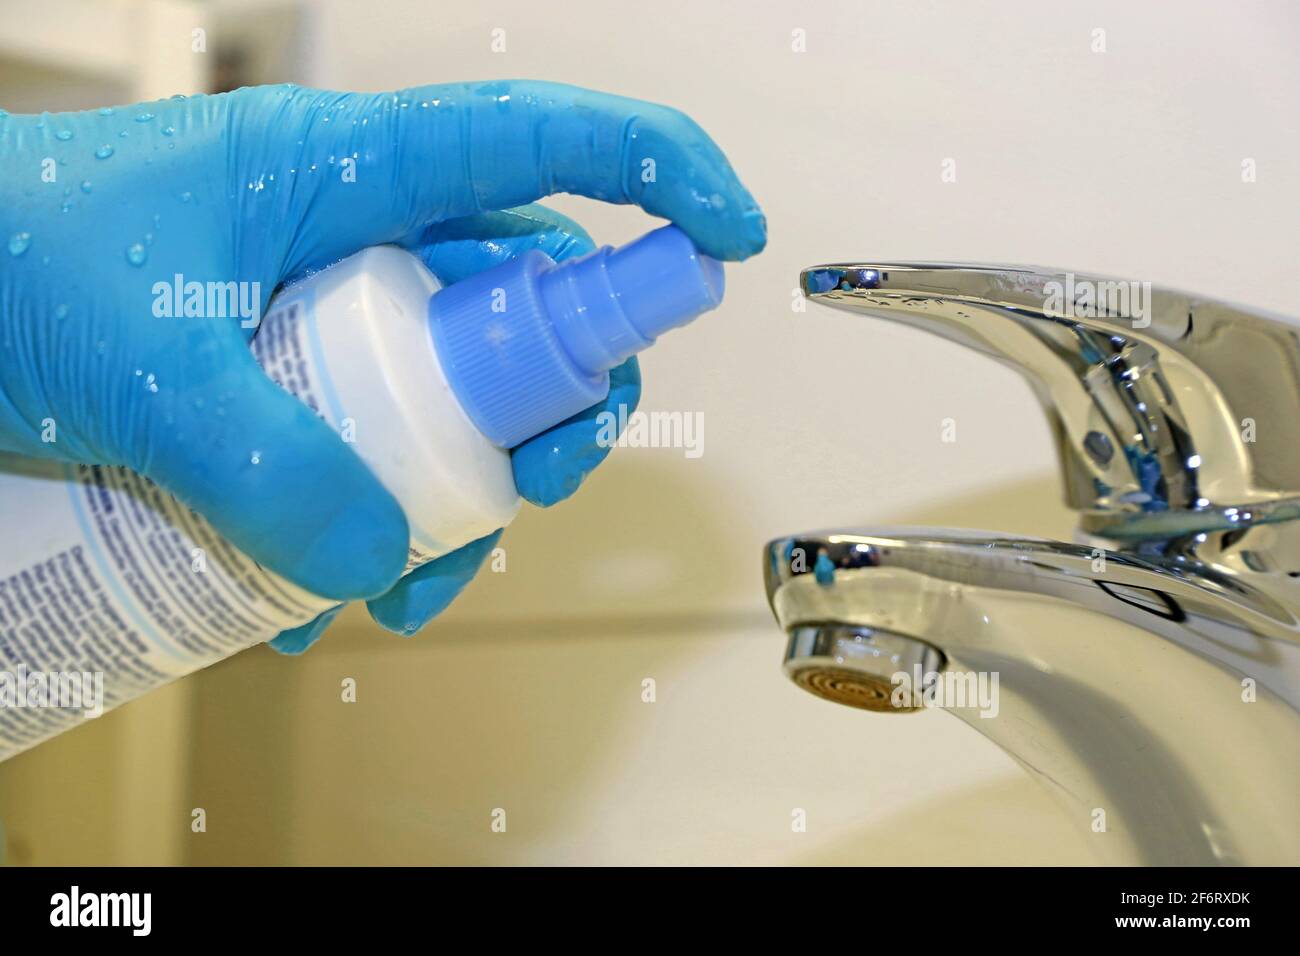 Cleaning and disinfection of a wash basin. Stock Photo